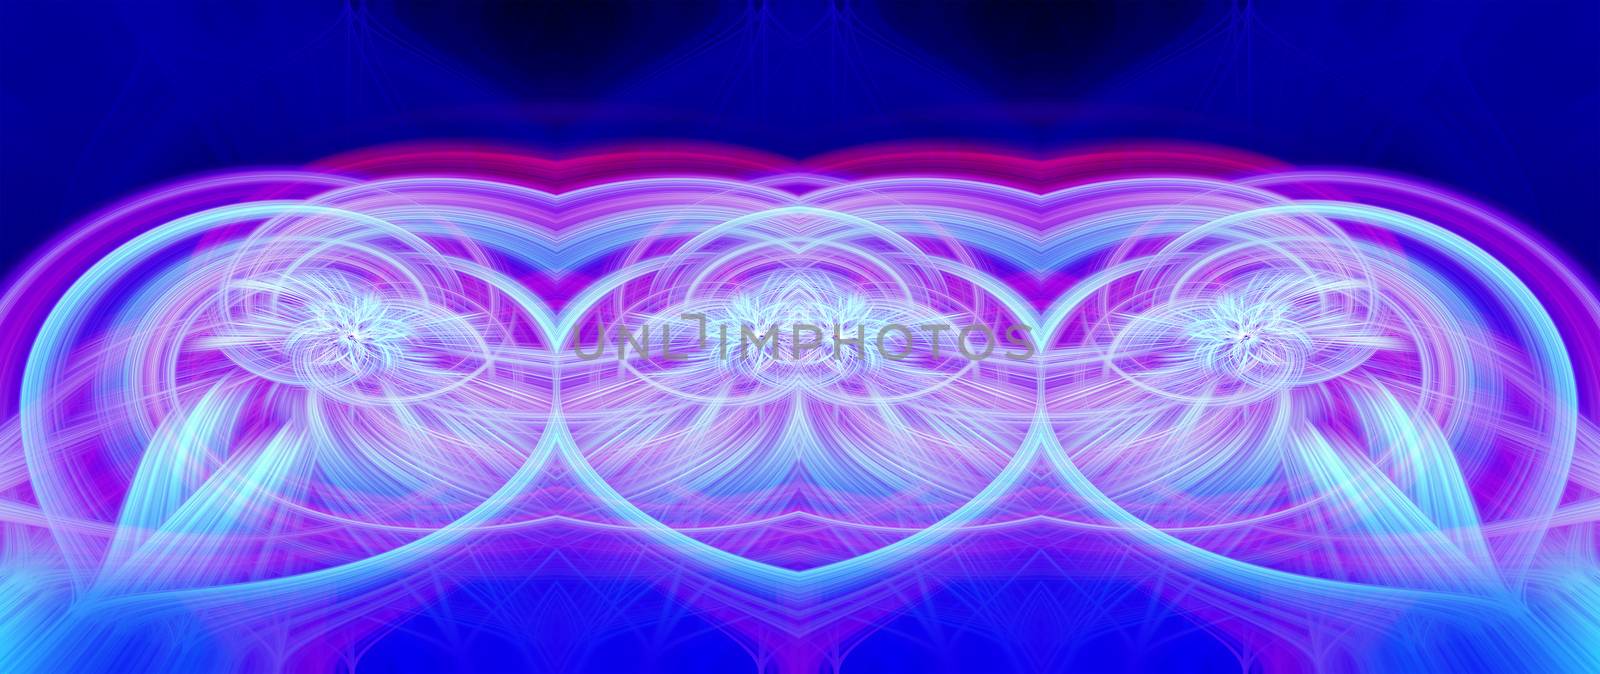 Beautiful abstract intertwined glowing 3d fibers forming a shape of sparkle, flame, flower, interlinked hearts. Blue, maroon, cyan, and purple colors. Banner size. Illustration by DamantisZ